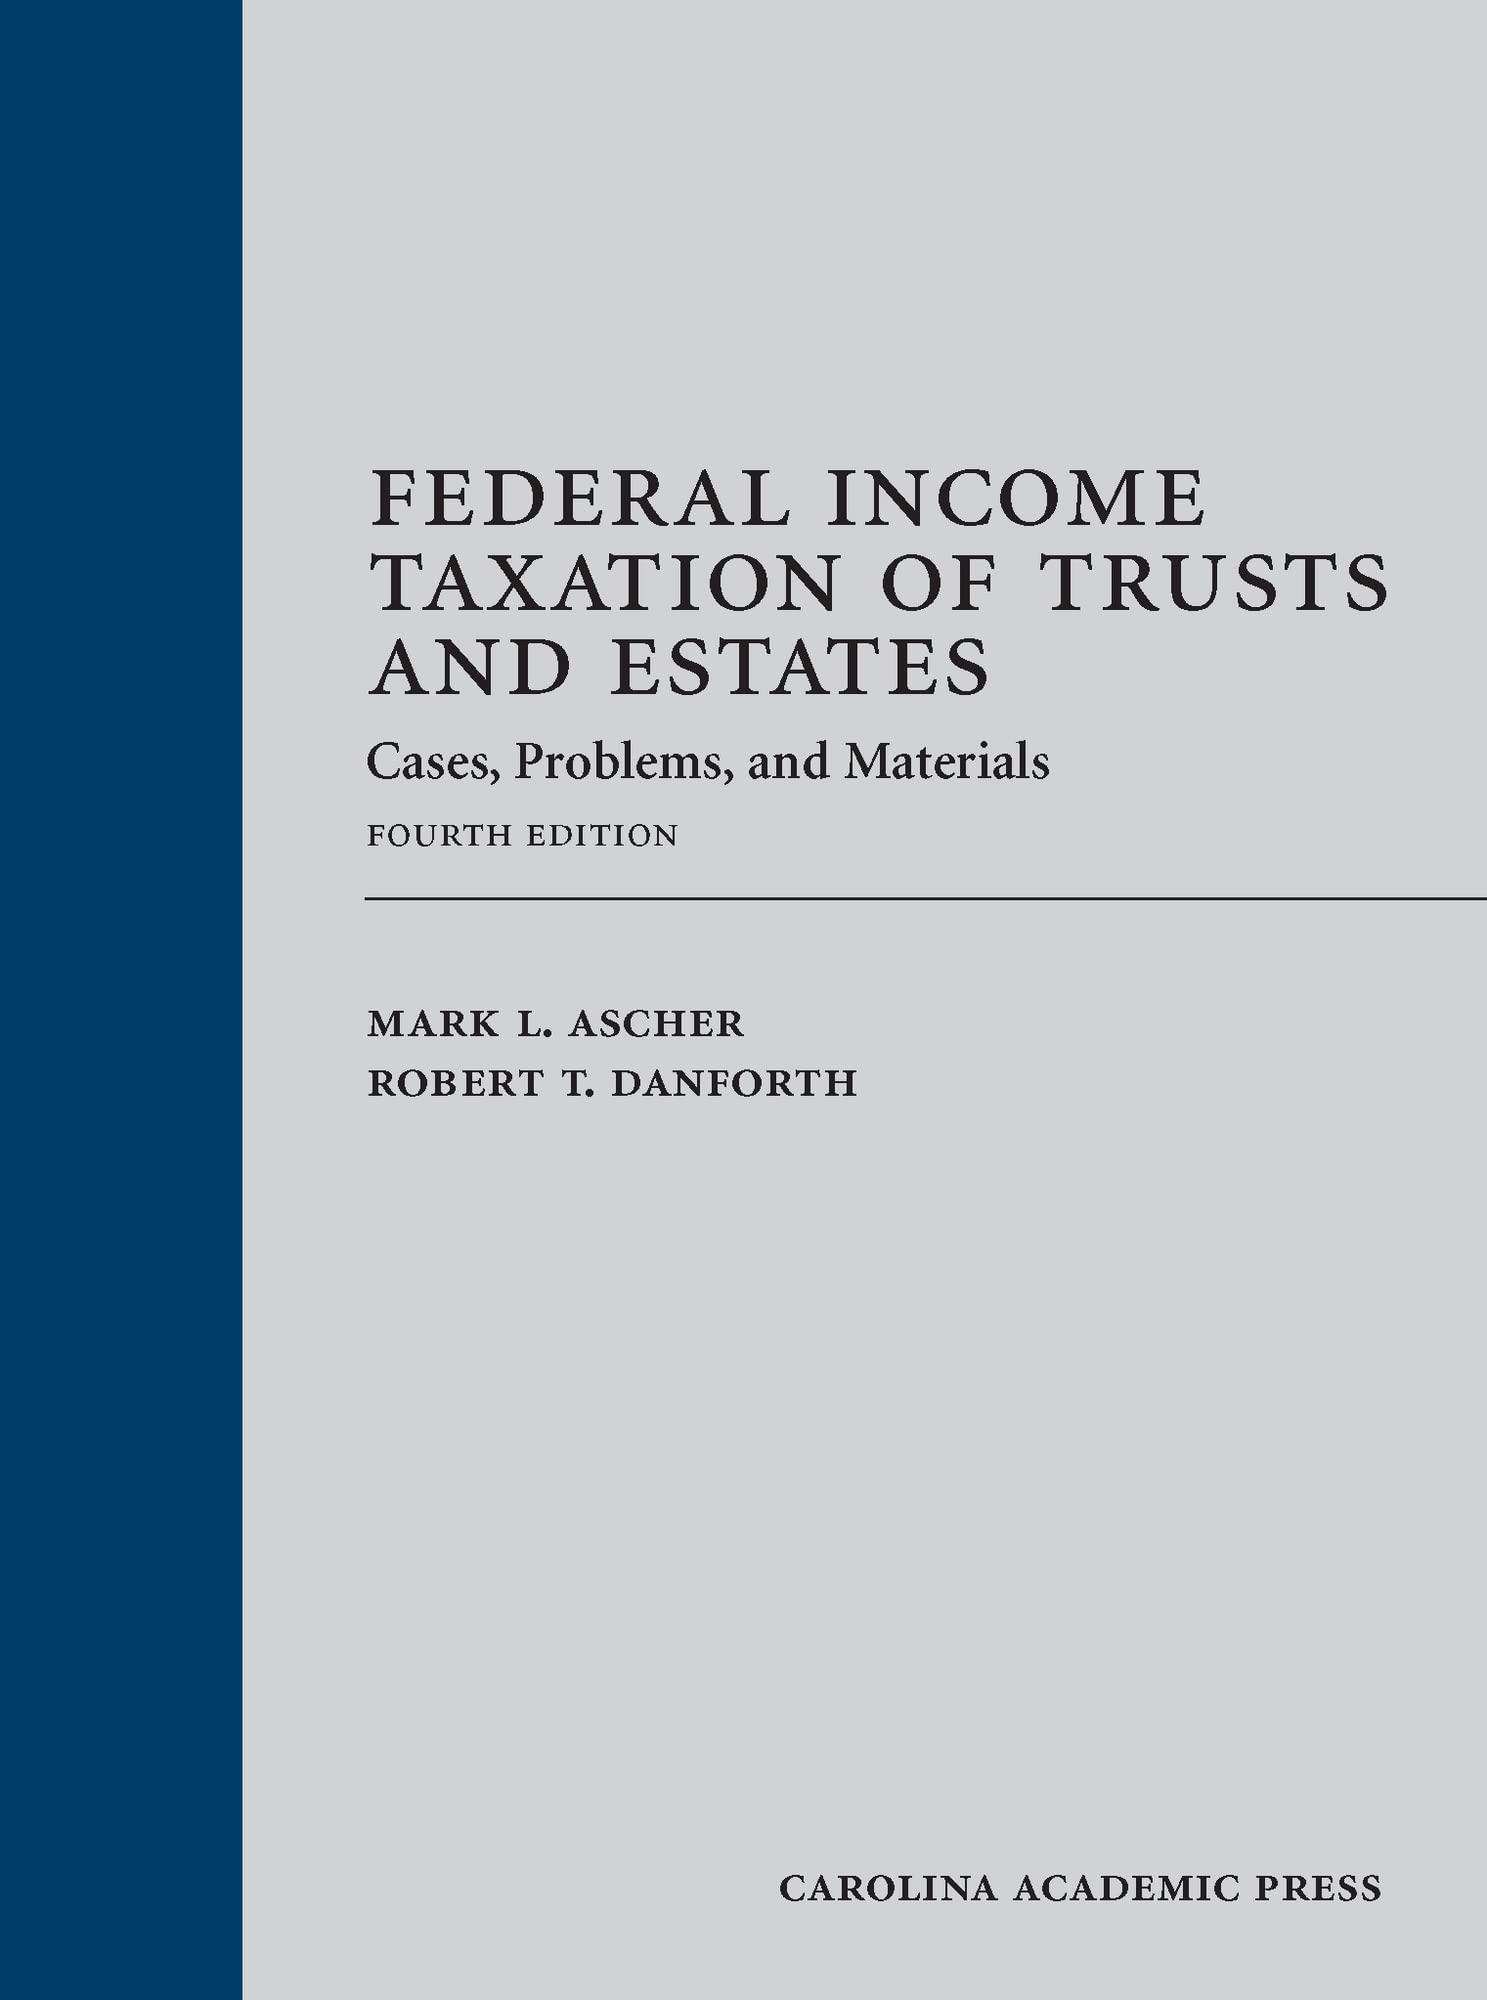 federal income taxation of trusts and estates cases problems and materials 4th edition mark ascher, robert